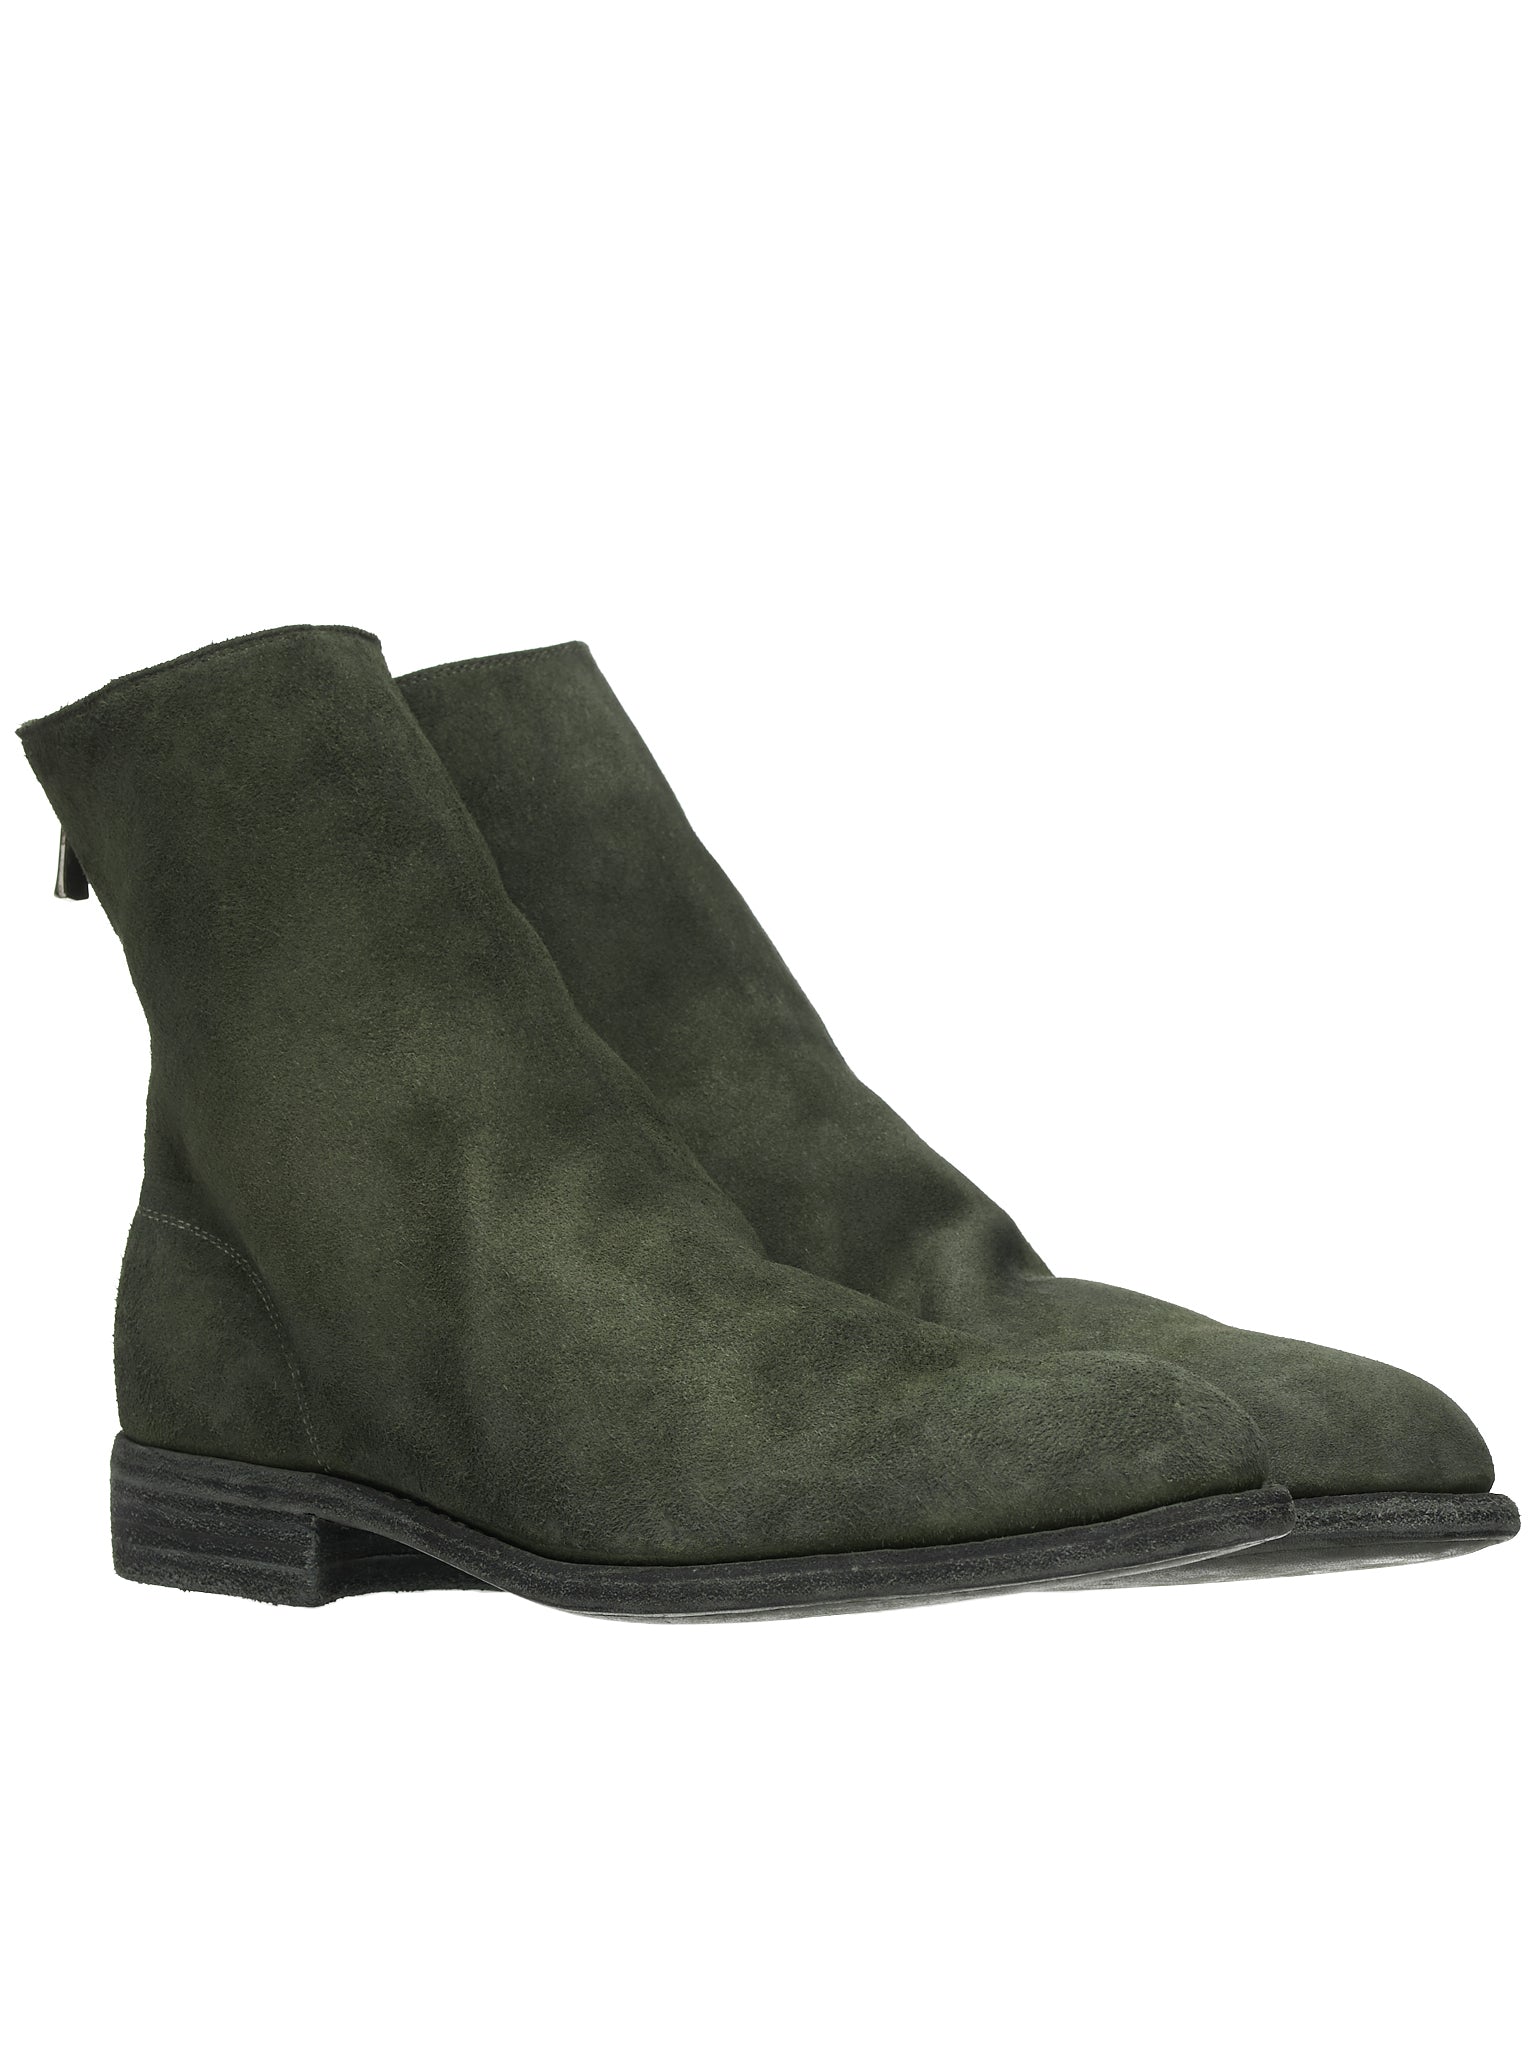 986 Horse Leather Zip Boots (986-HORSE-REVERSE-GREEN)